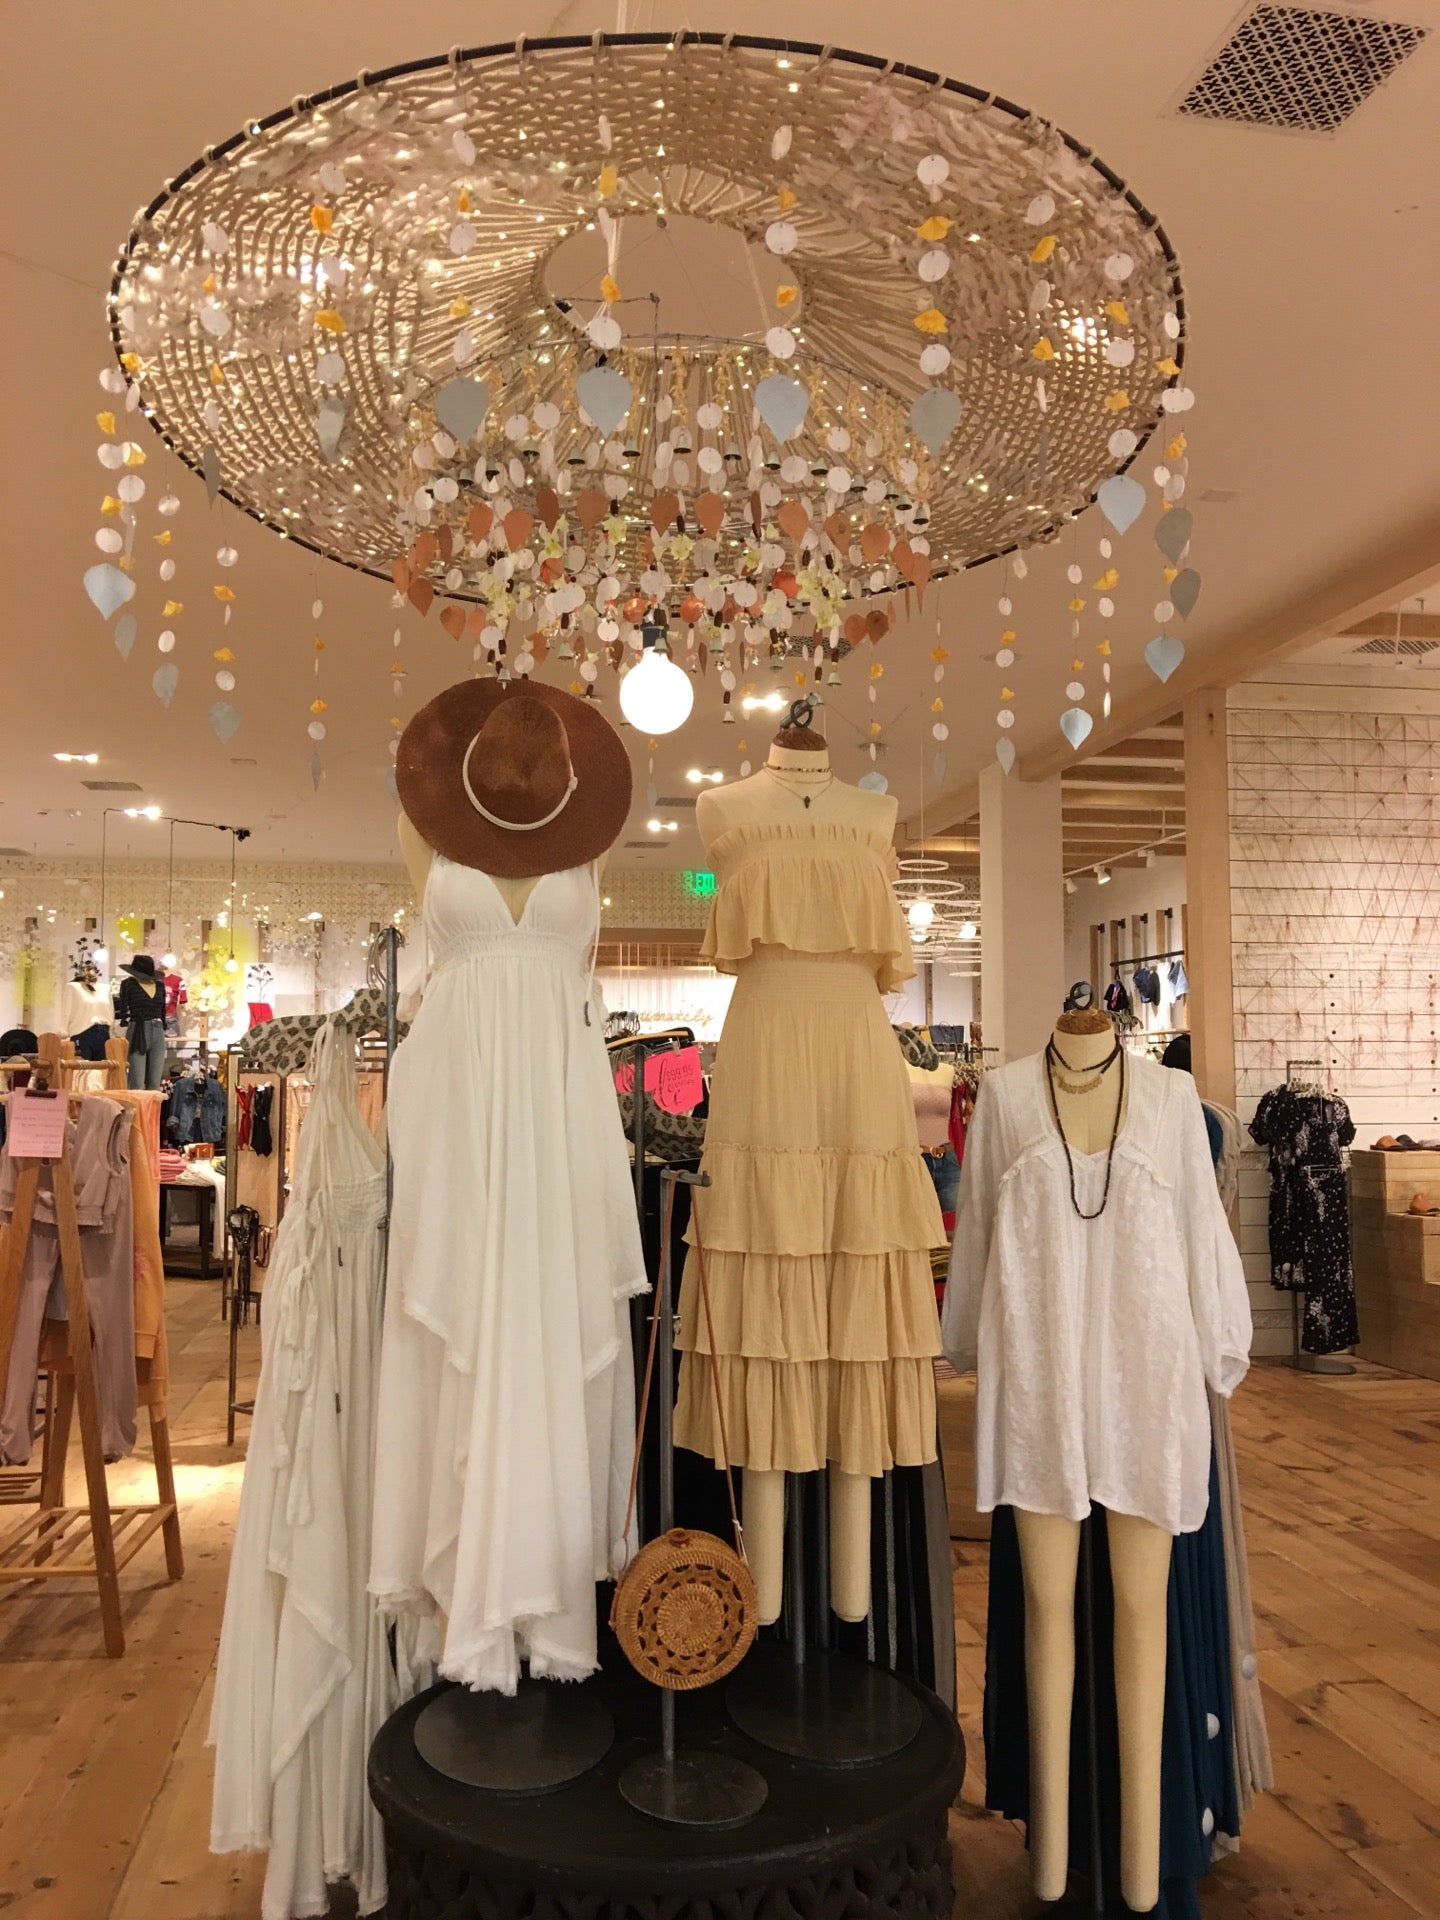 Free People's Largest East Coast Store Is In Fort Lauderdale - Racked Miami